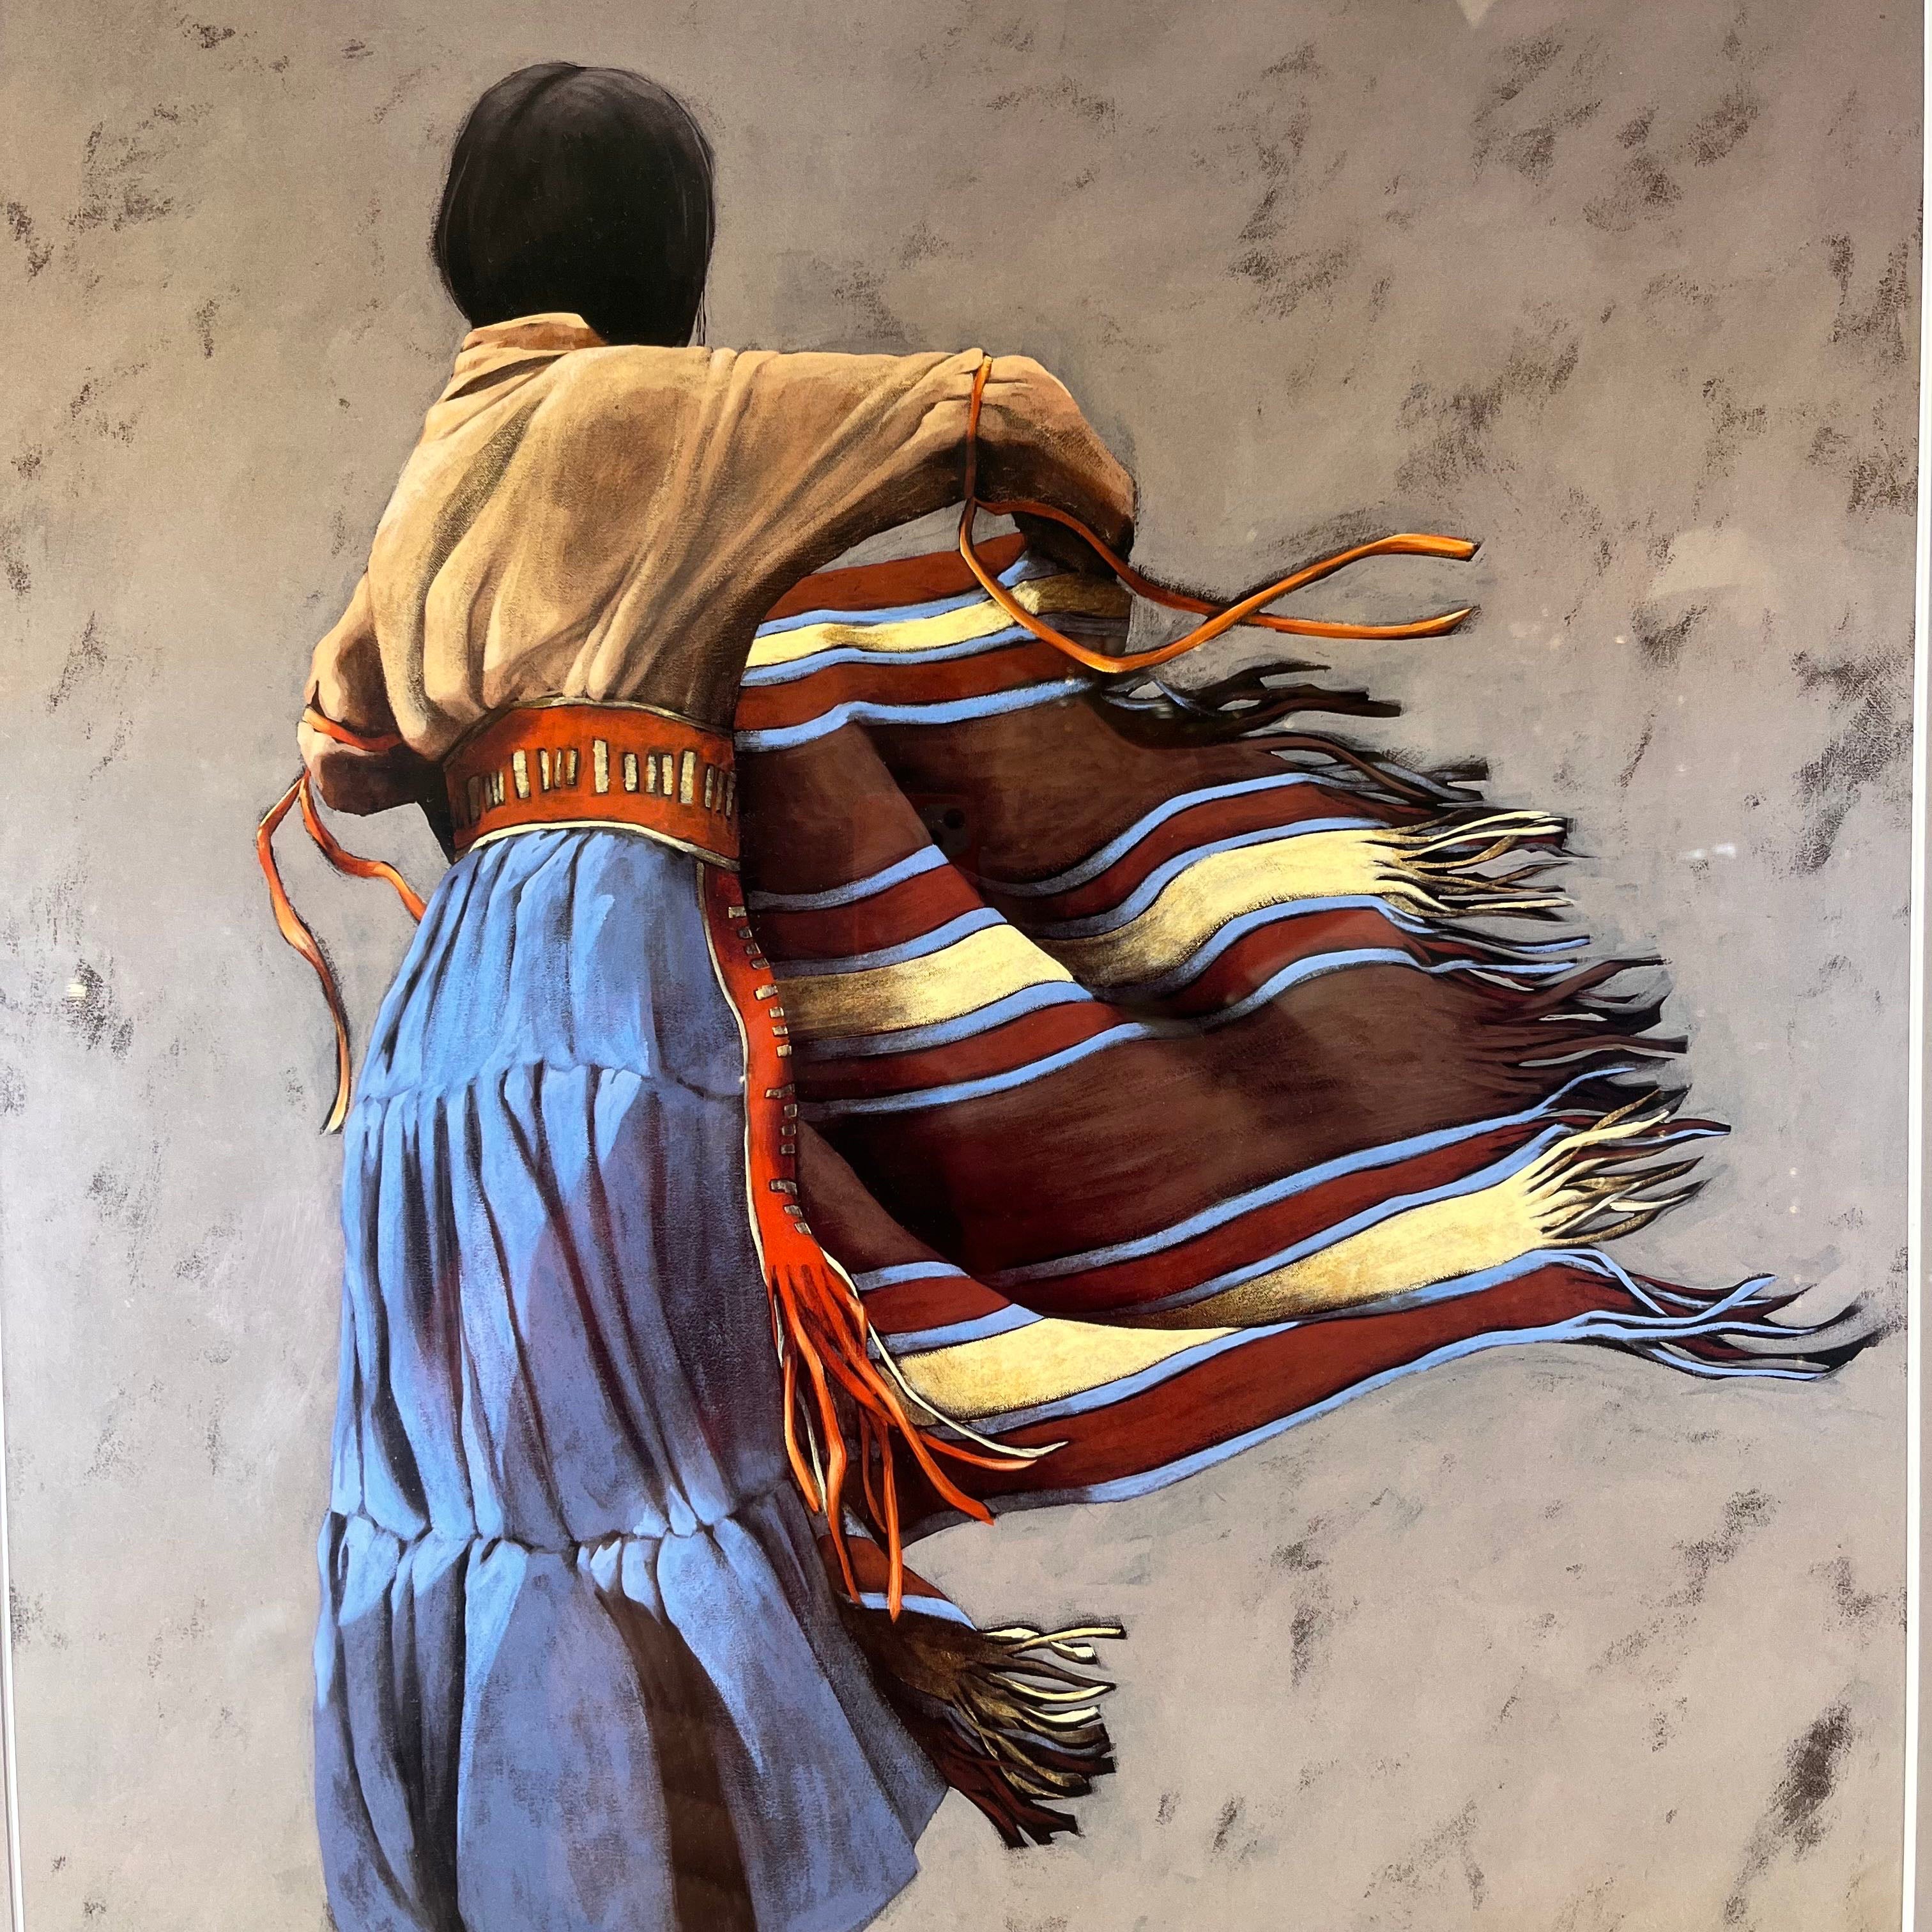 "Windy Morning" by Mary Wyant Wall Decor